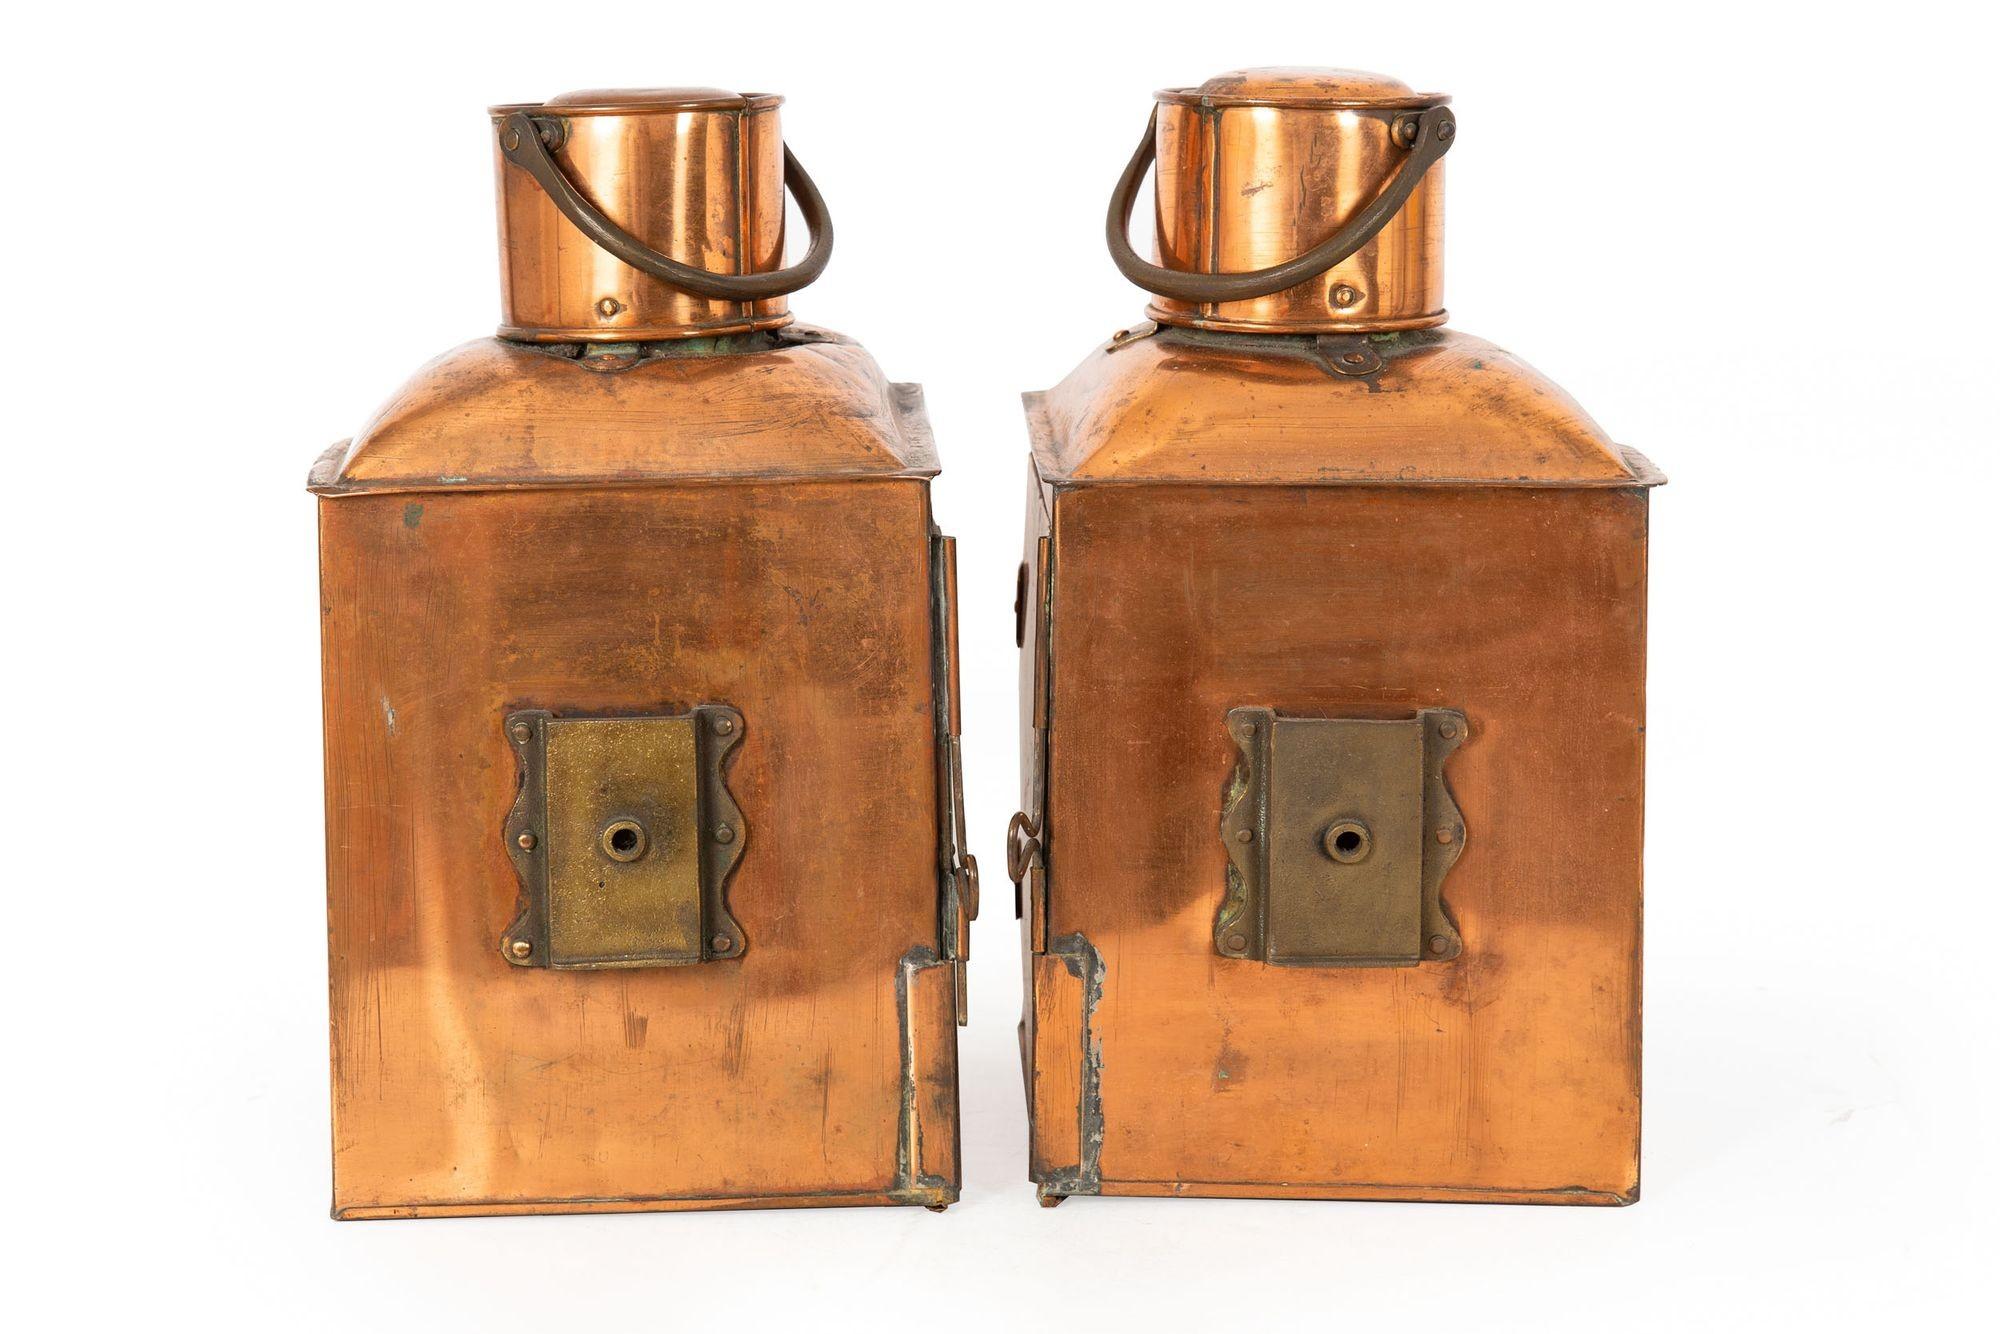 PAIR OF ENGLISH MARINE COPPER STARBOARD & PORT SHIP'S LANTERNS
Both with original applied plaques 